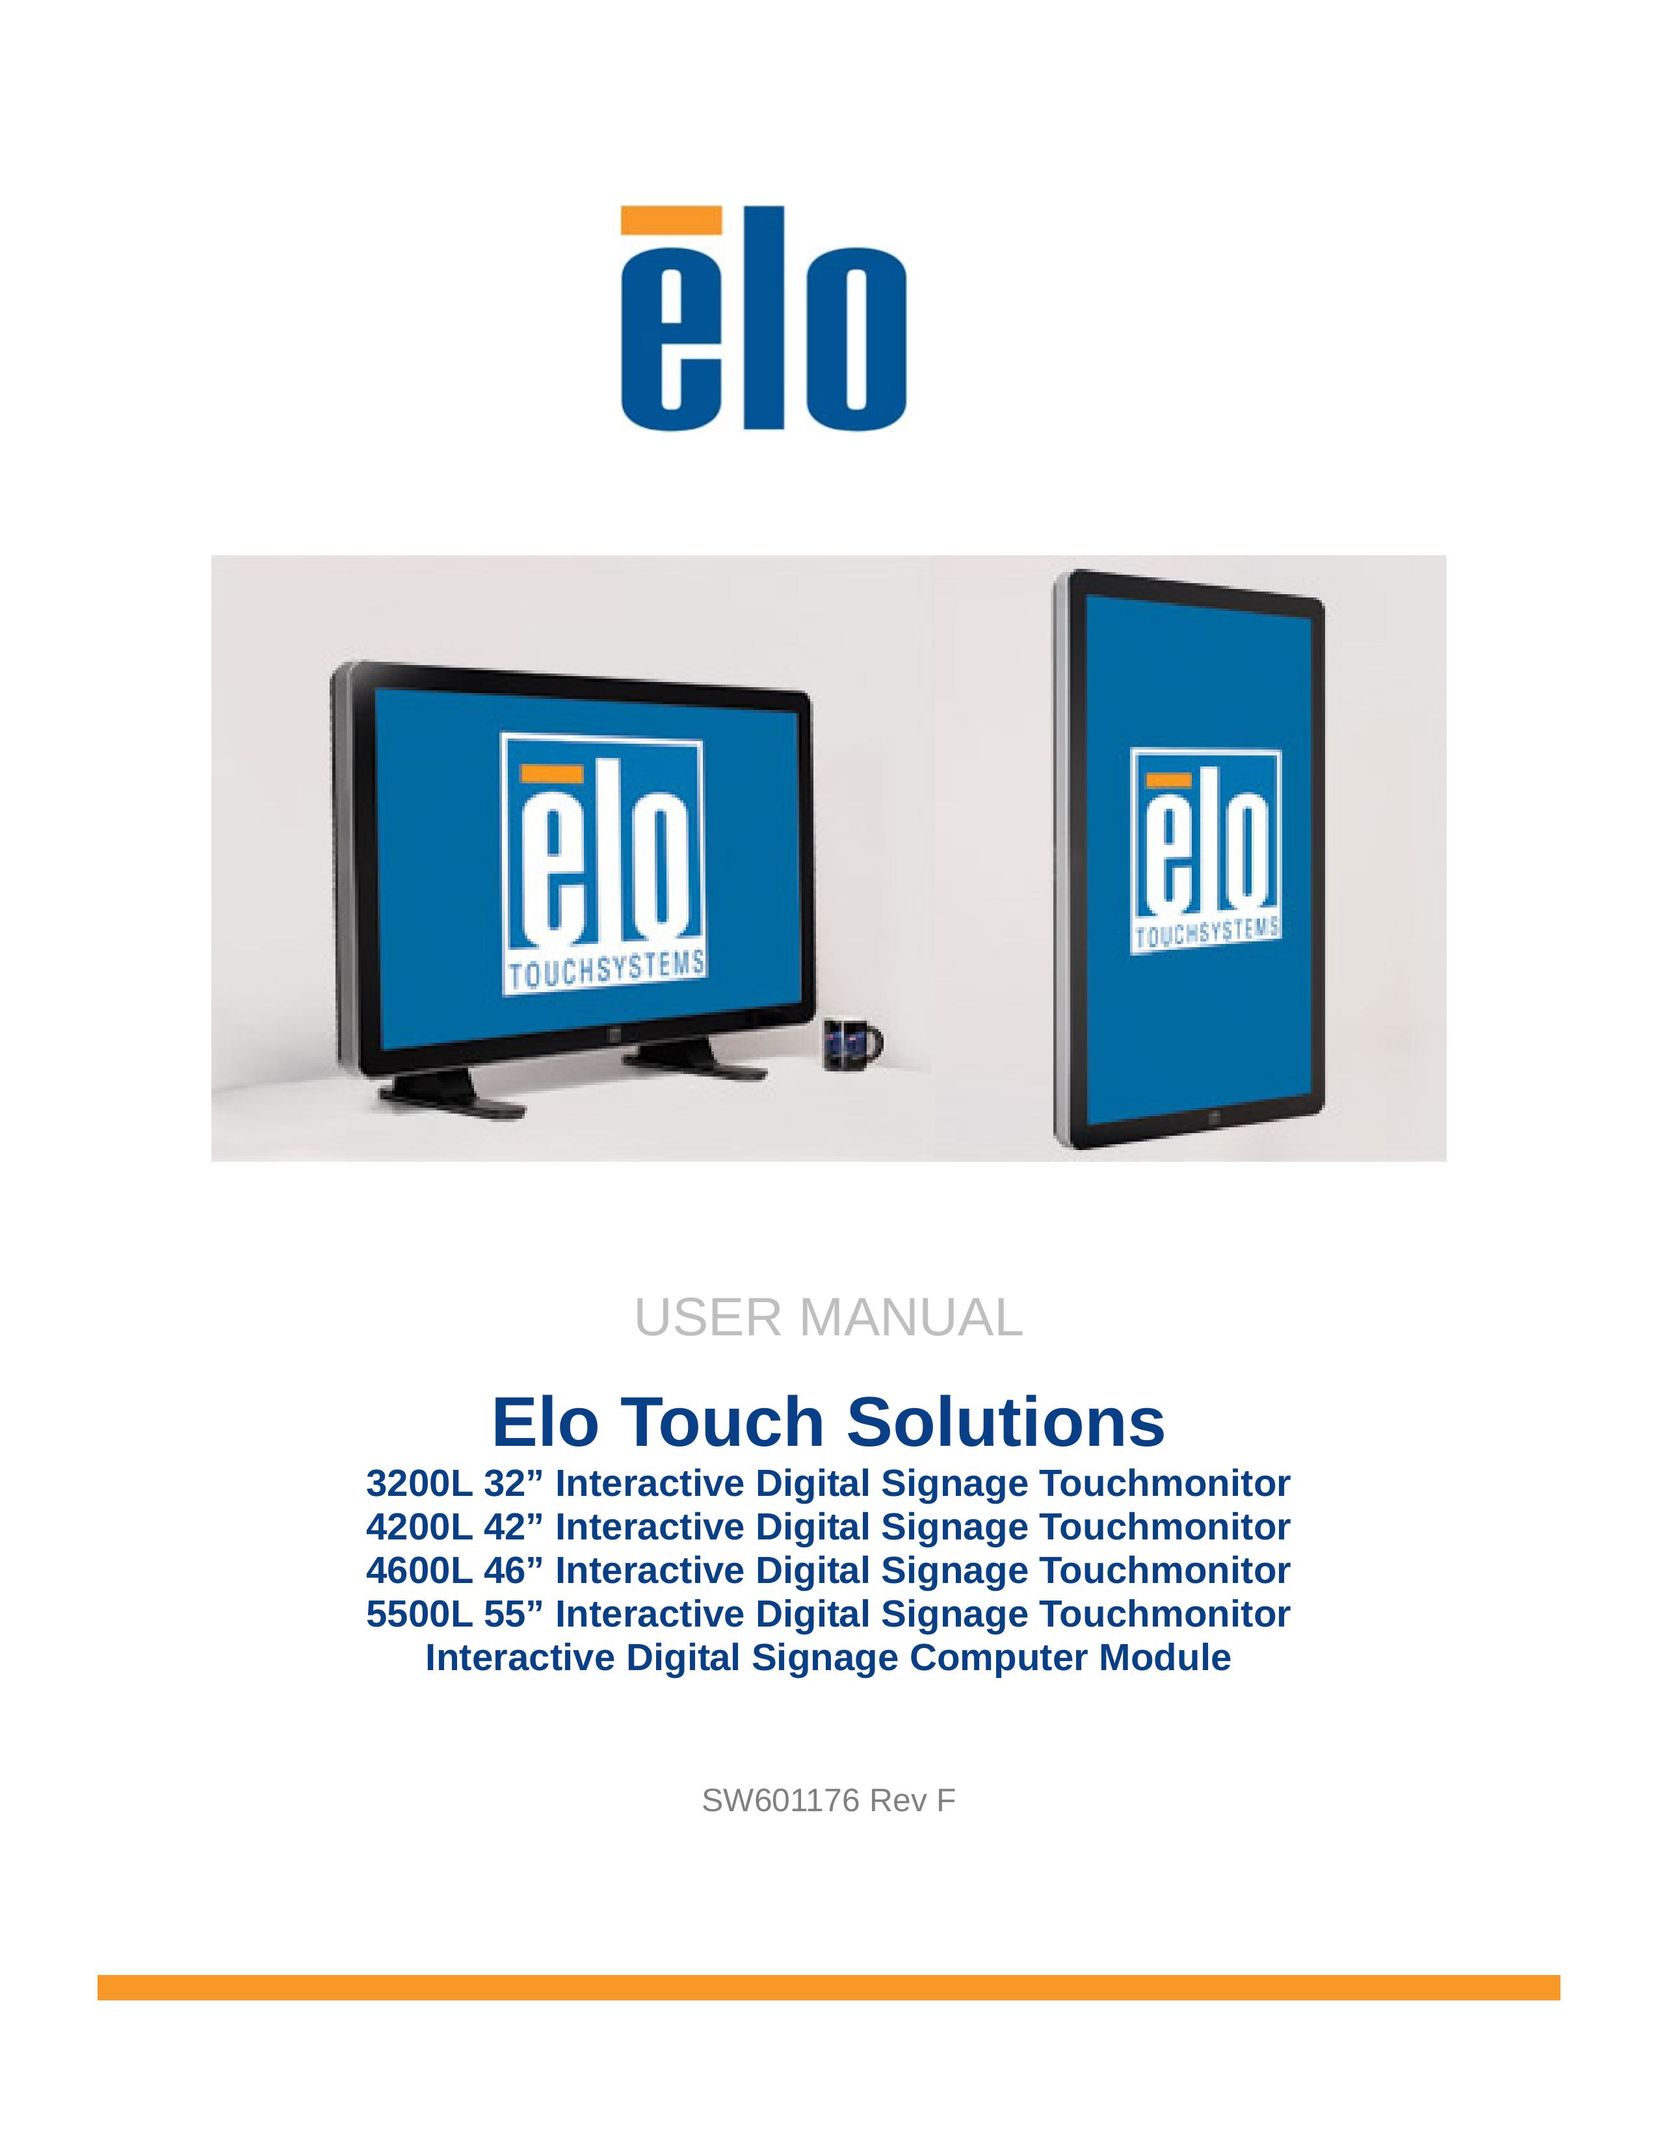 Elo TouchSystems 3200L Car Video System User Manual